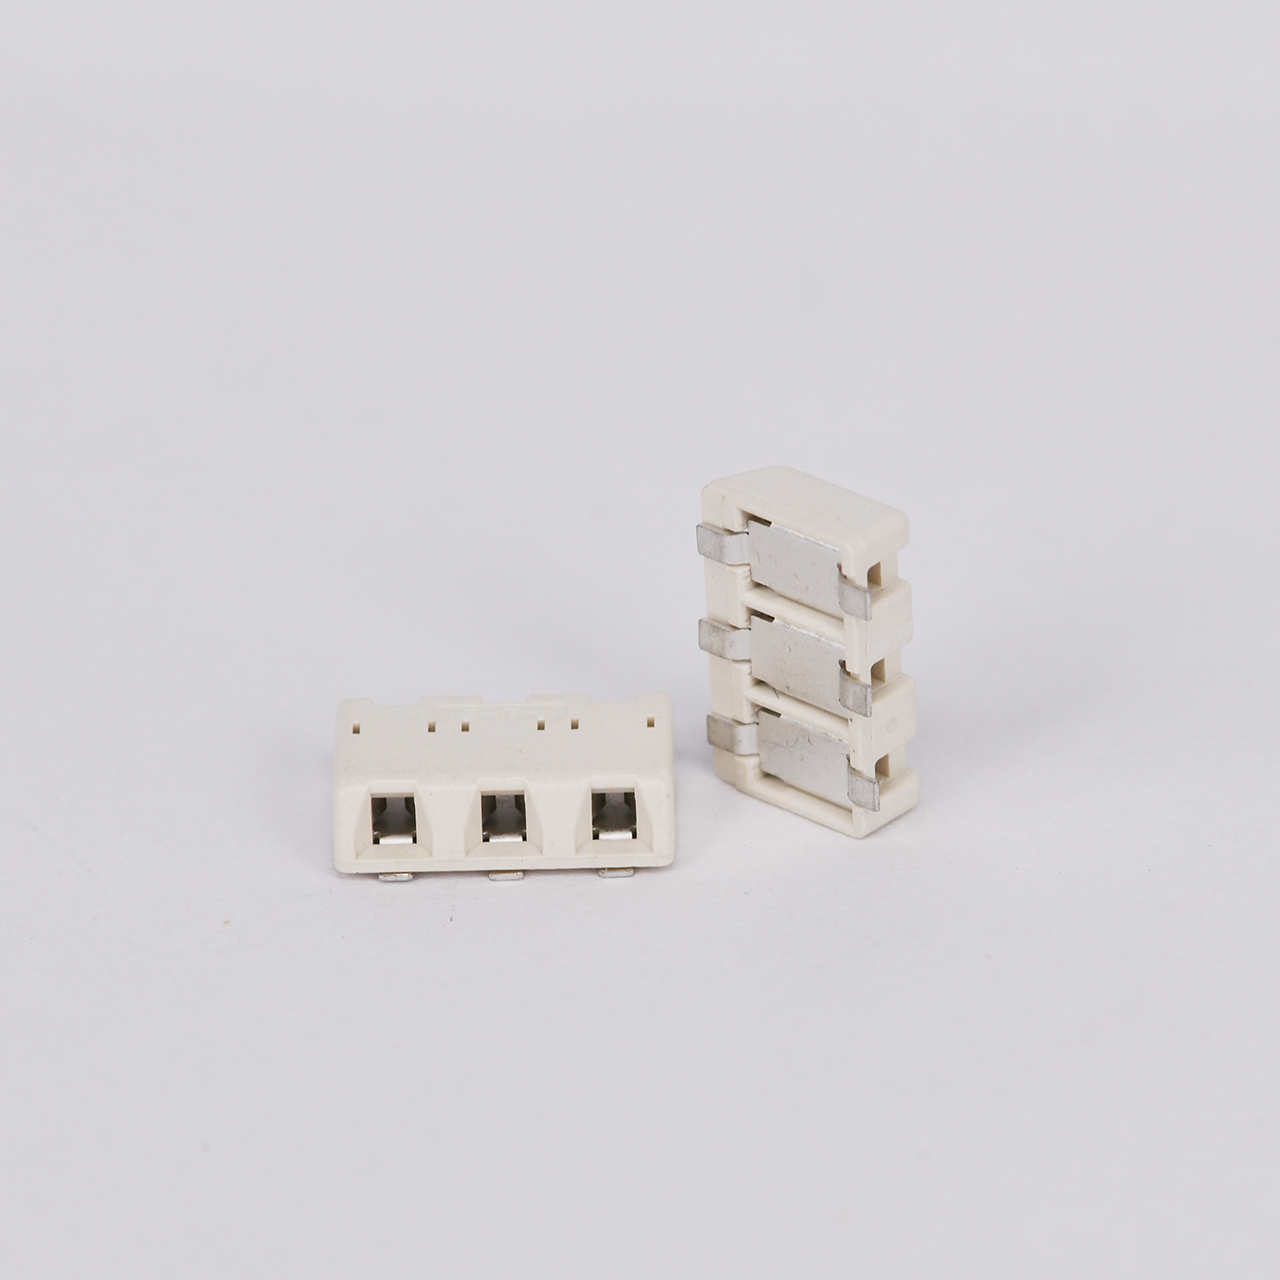 GH5060 Led light connector, pitch 3.8mm, 1-3 pin, Side entry connector, Wago 2060 replacement